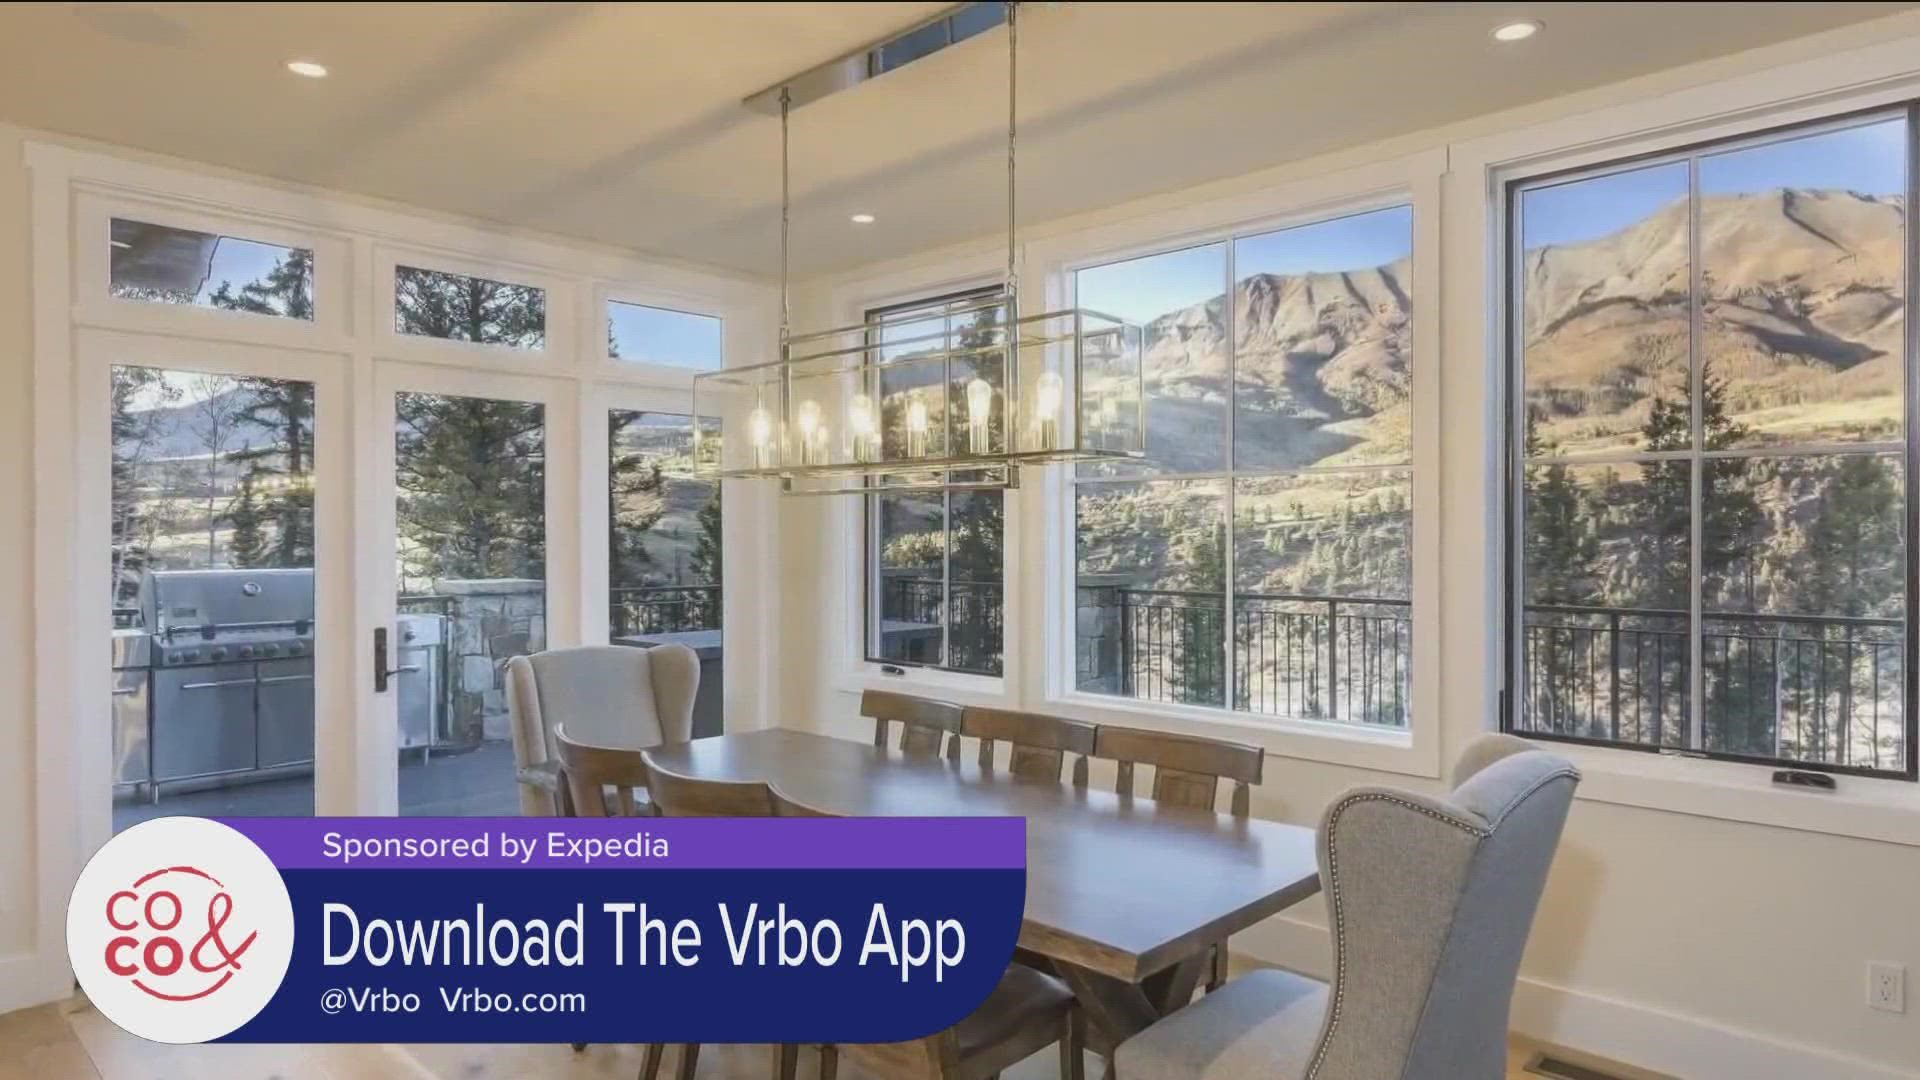 Download the Vrbo app to get a jump start on your summer travel plans! **PAID CONTENT**